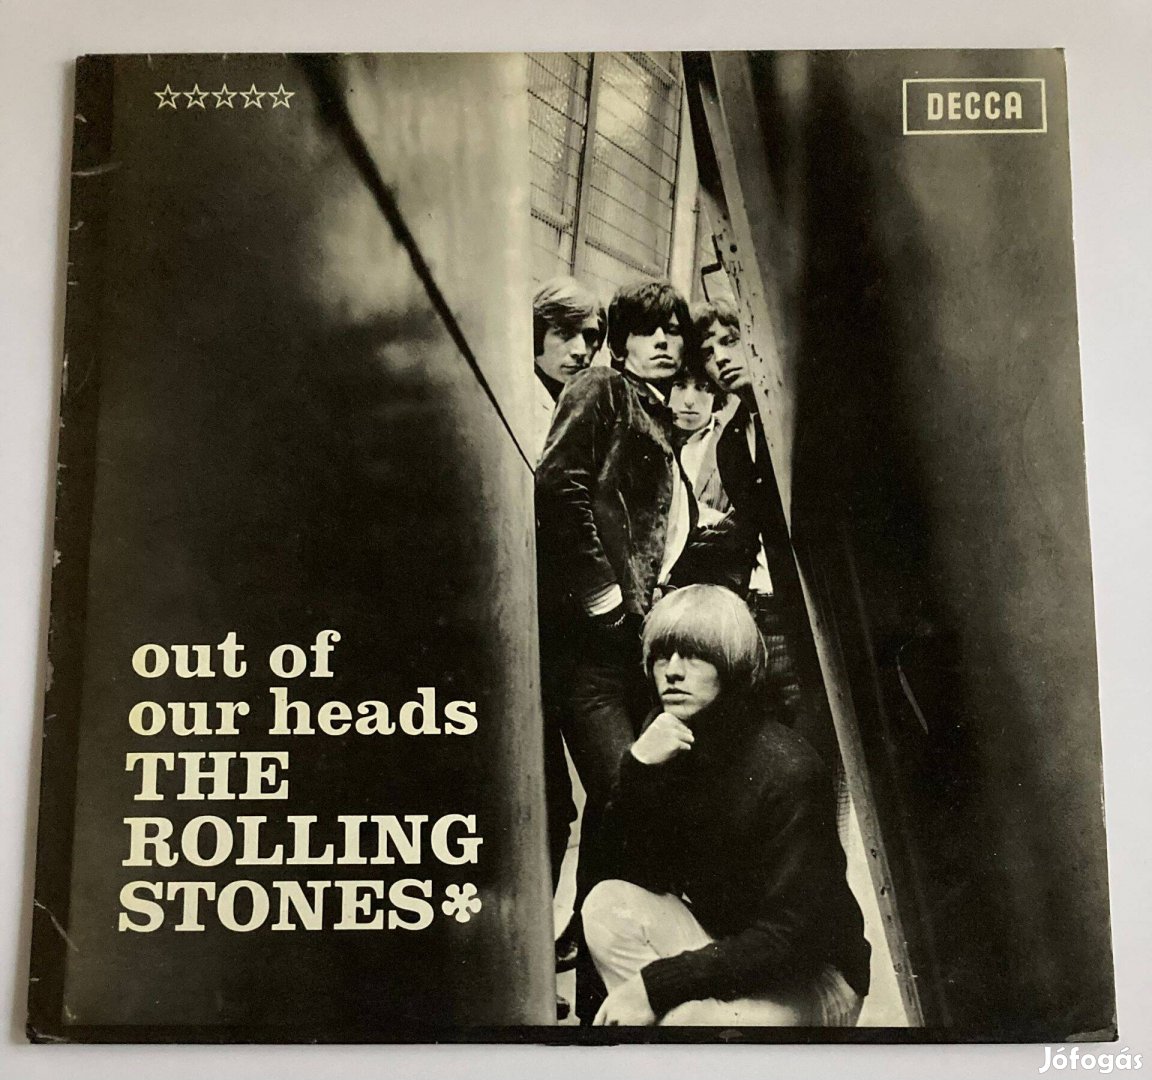 Rolling Stones - Out of Our Heads (német, Decca Royal Sound)